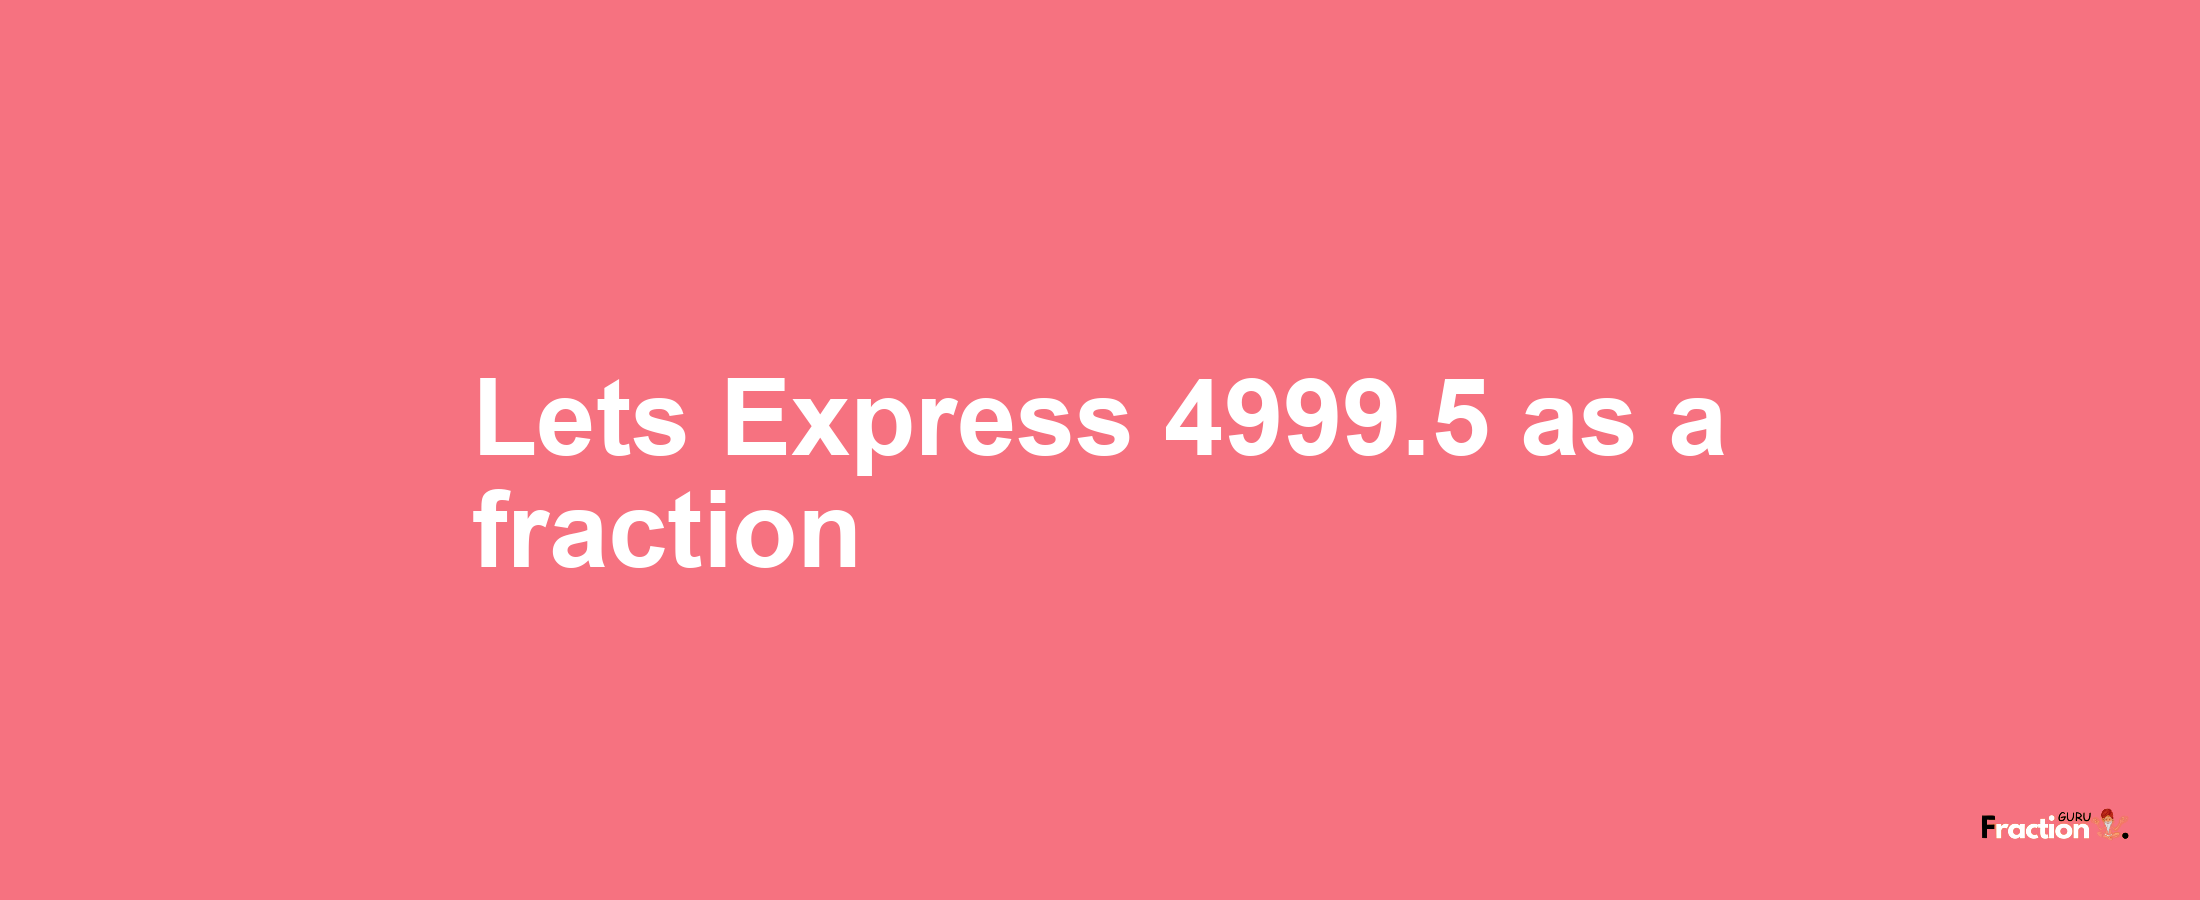 Lets Express 4999.5 as afraction